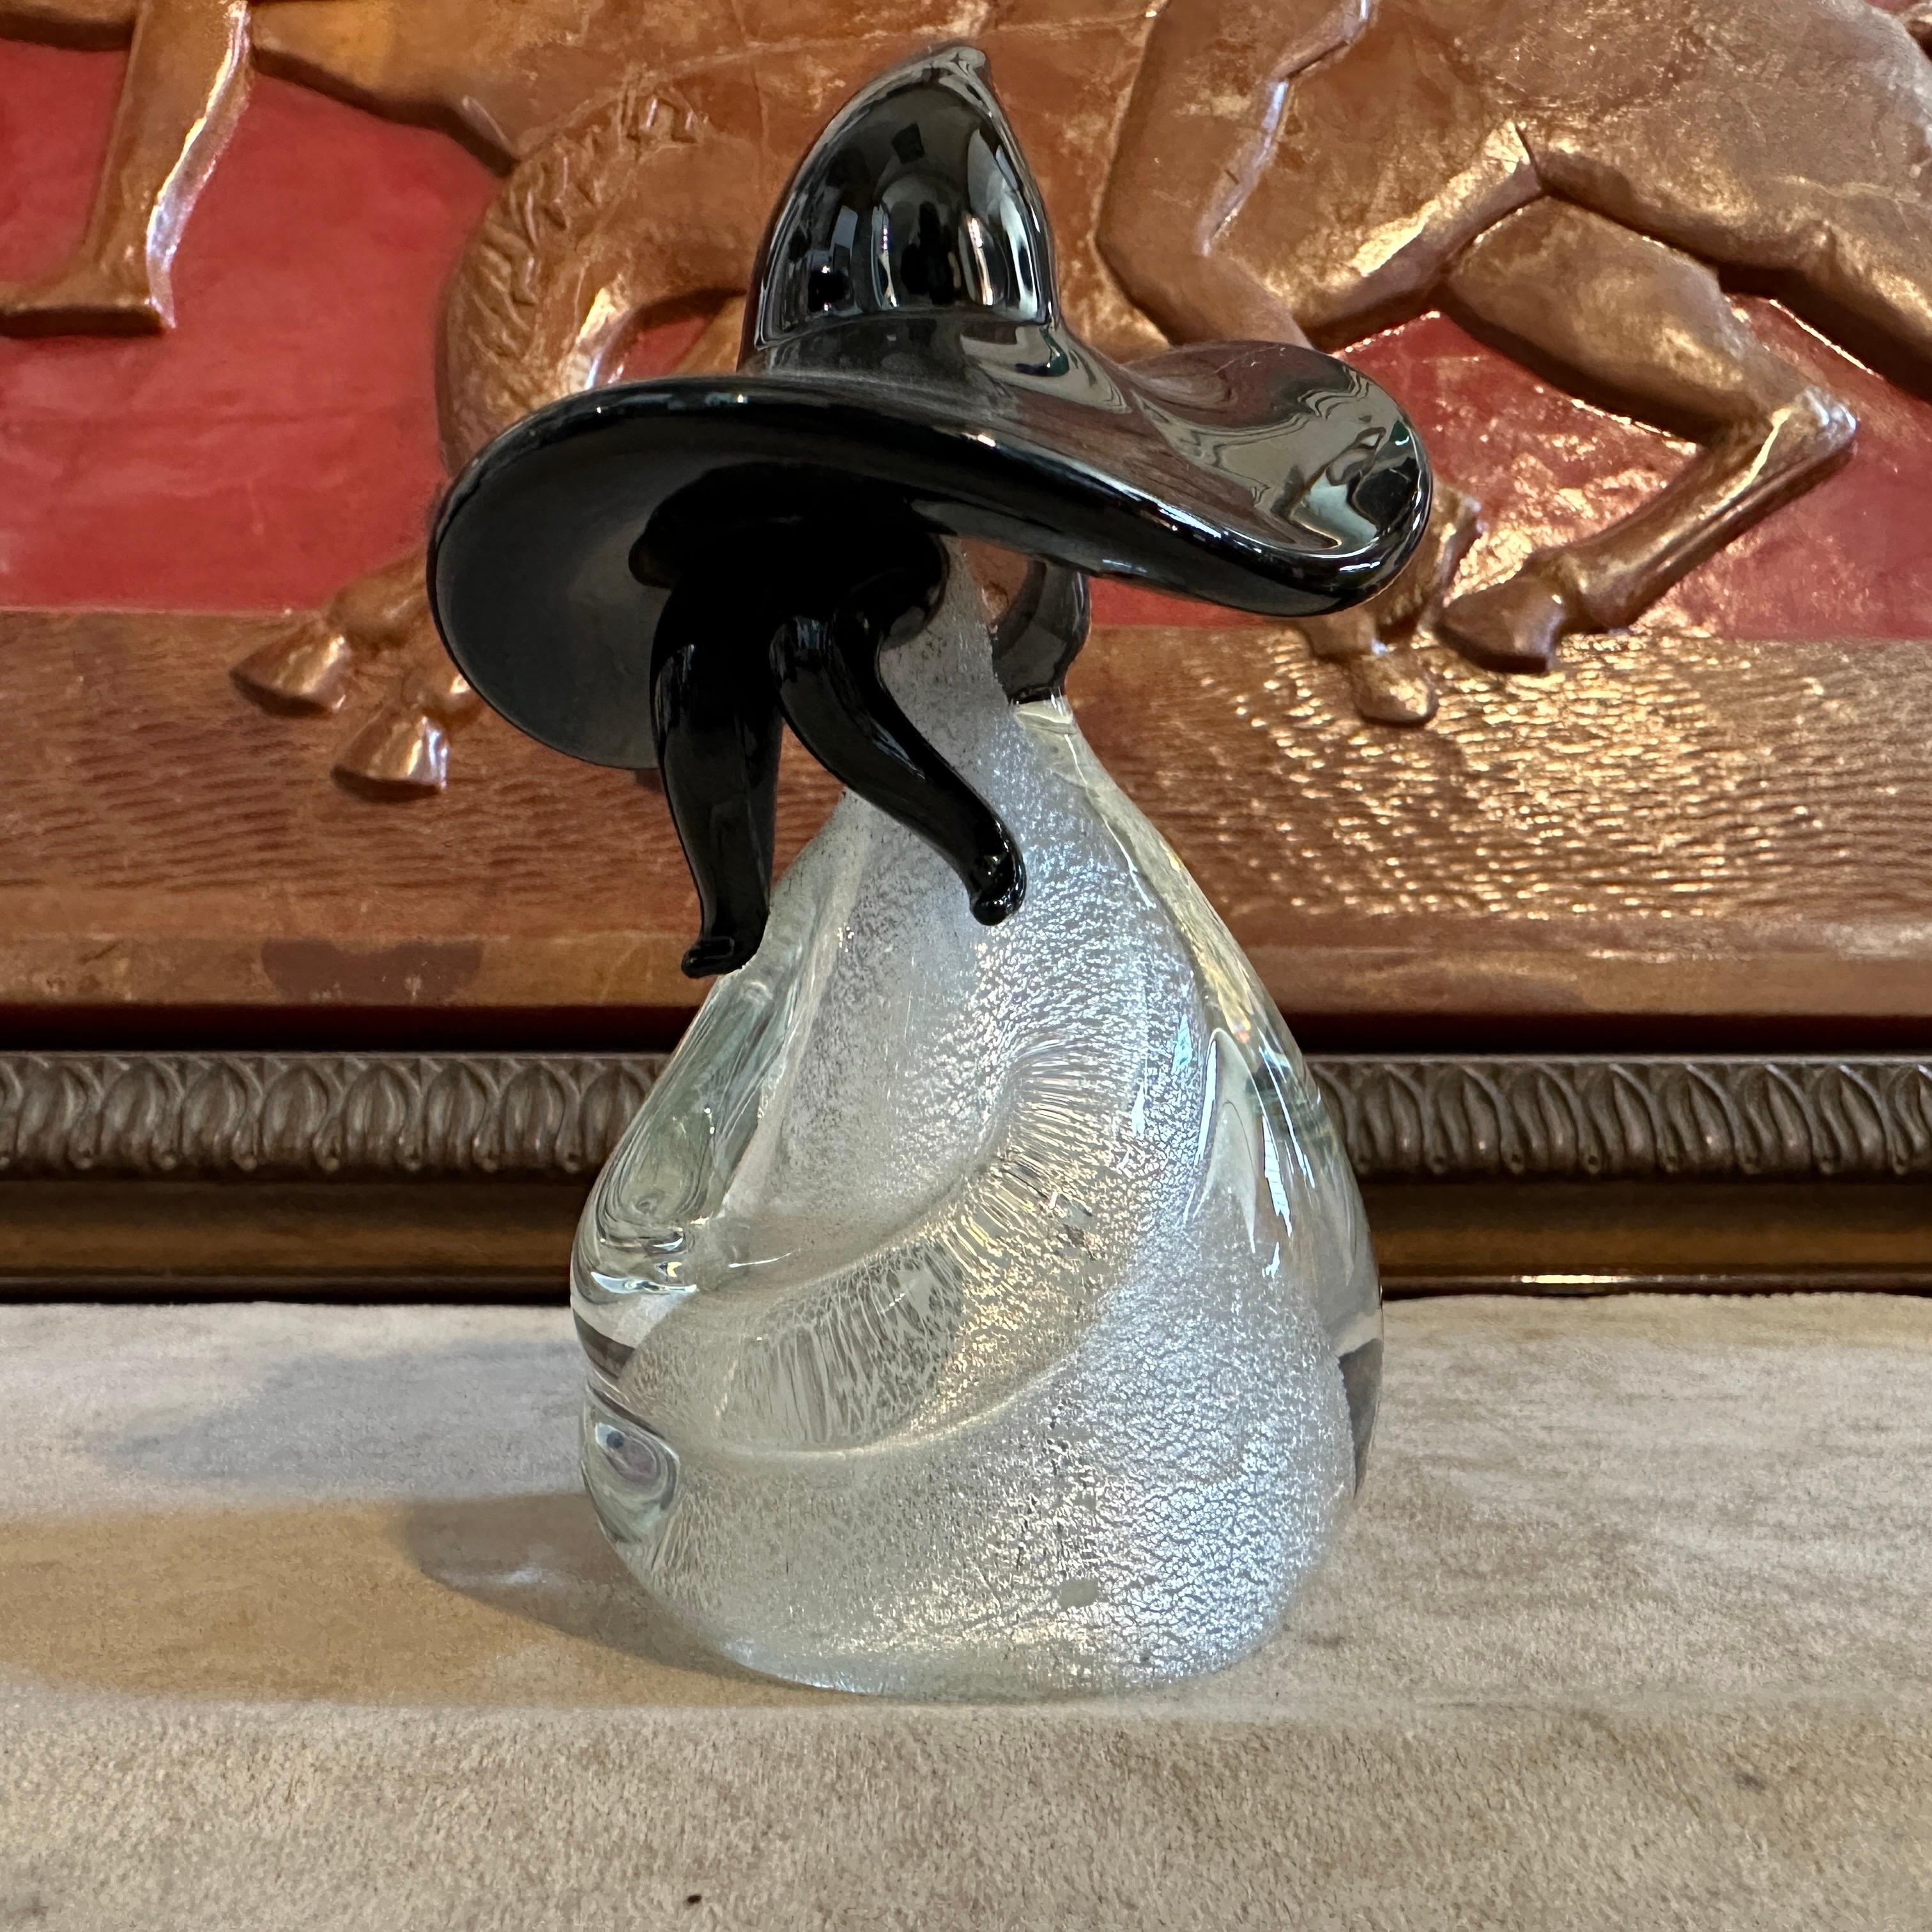 This glass figure of a Mexican is a striking piece of artistry, combining the traditional craftsmanship of Murano glassmaking with a modern aesthetic and cultural representation. The figure depicts a Mexican individual, characterized by their